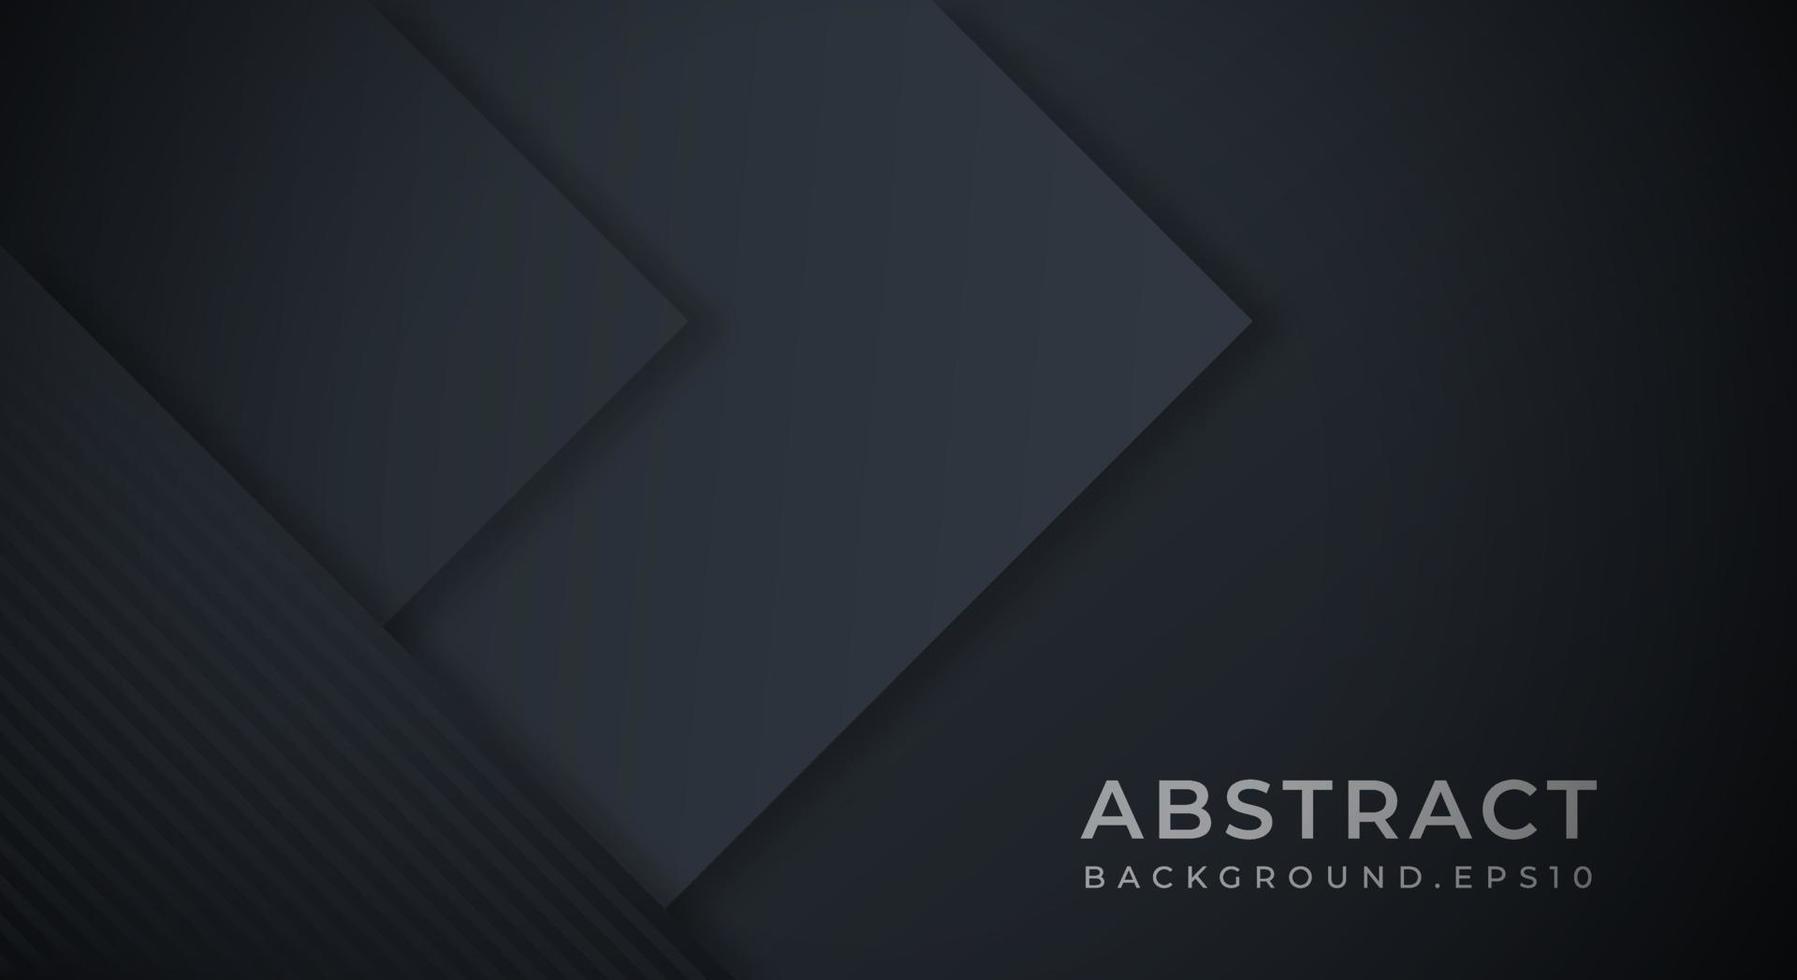 Abstract Background Textured with Dark Black Navy Paper Layers. Usable for Decorative web layout, Poster, Banner, Corporate Brochure and Seminar Template Design vector